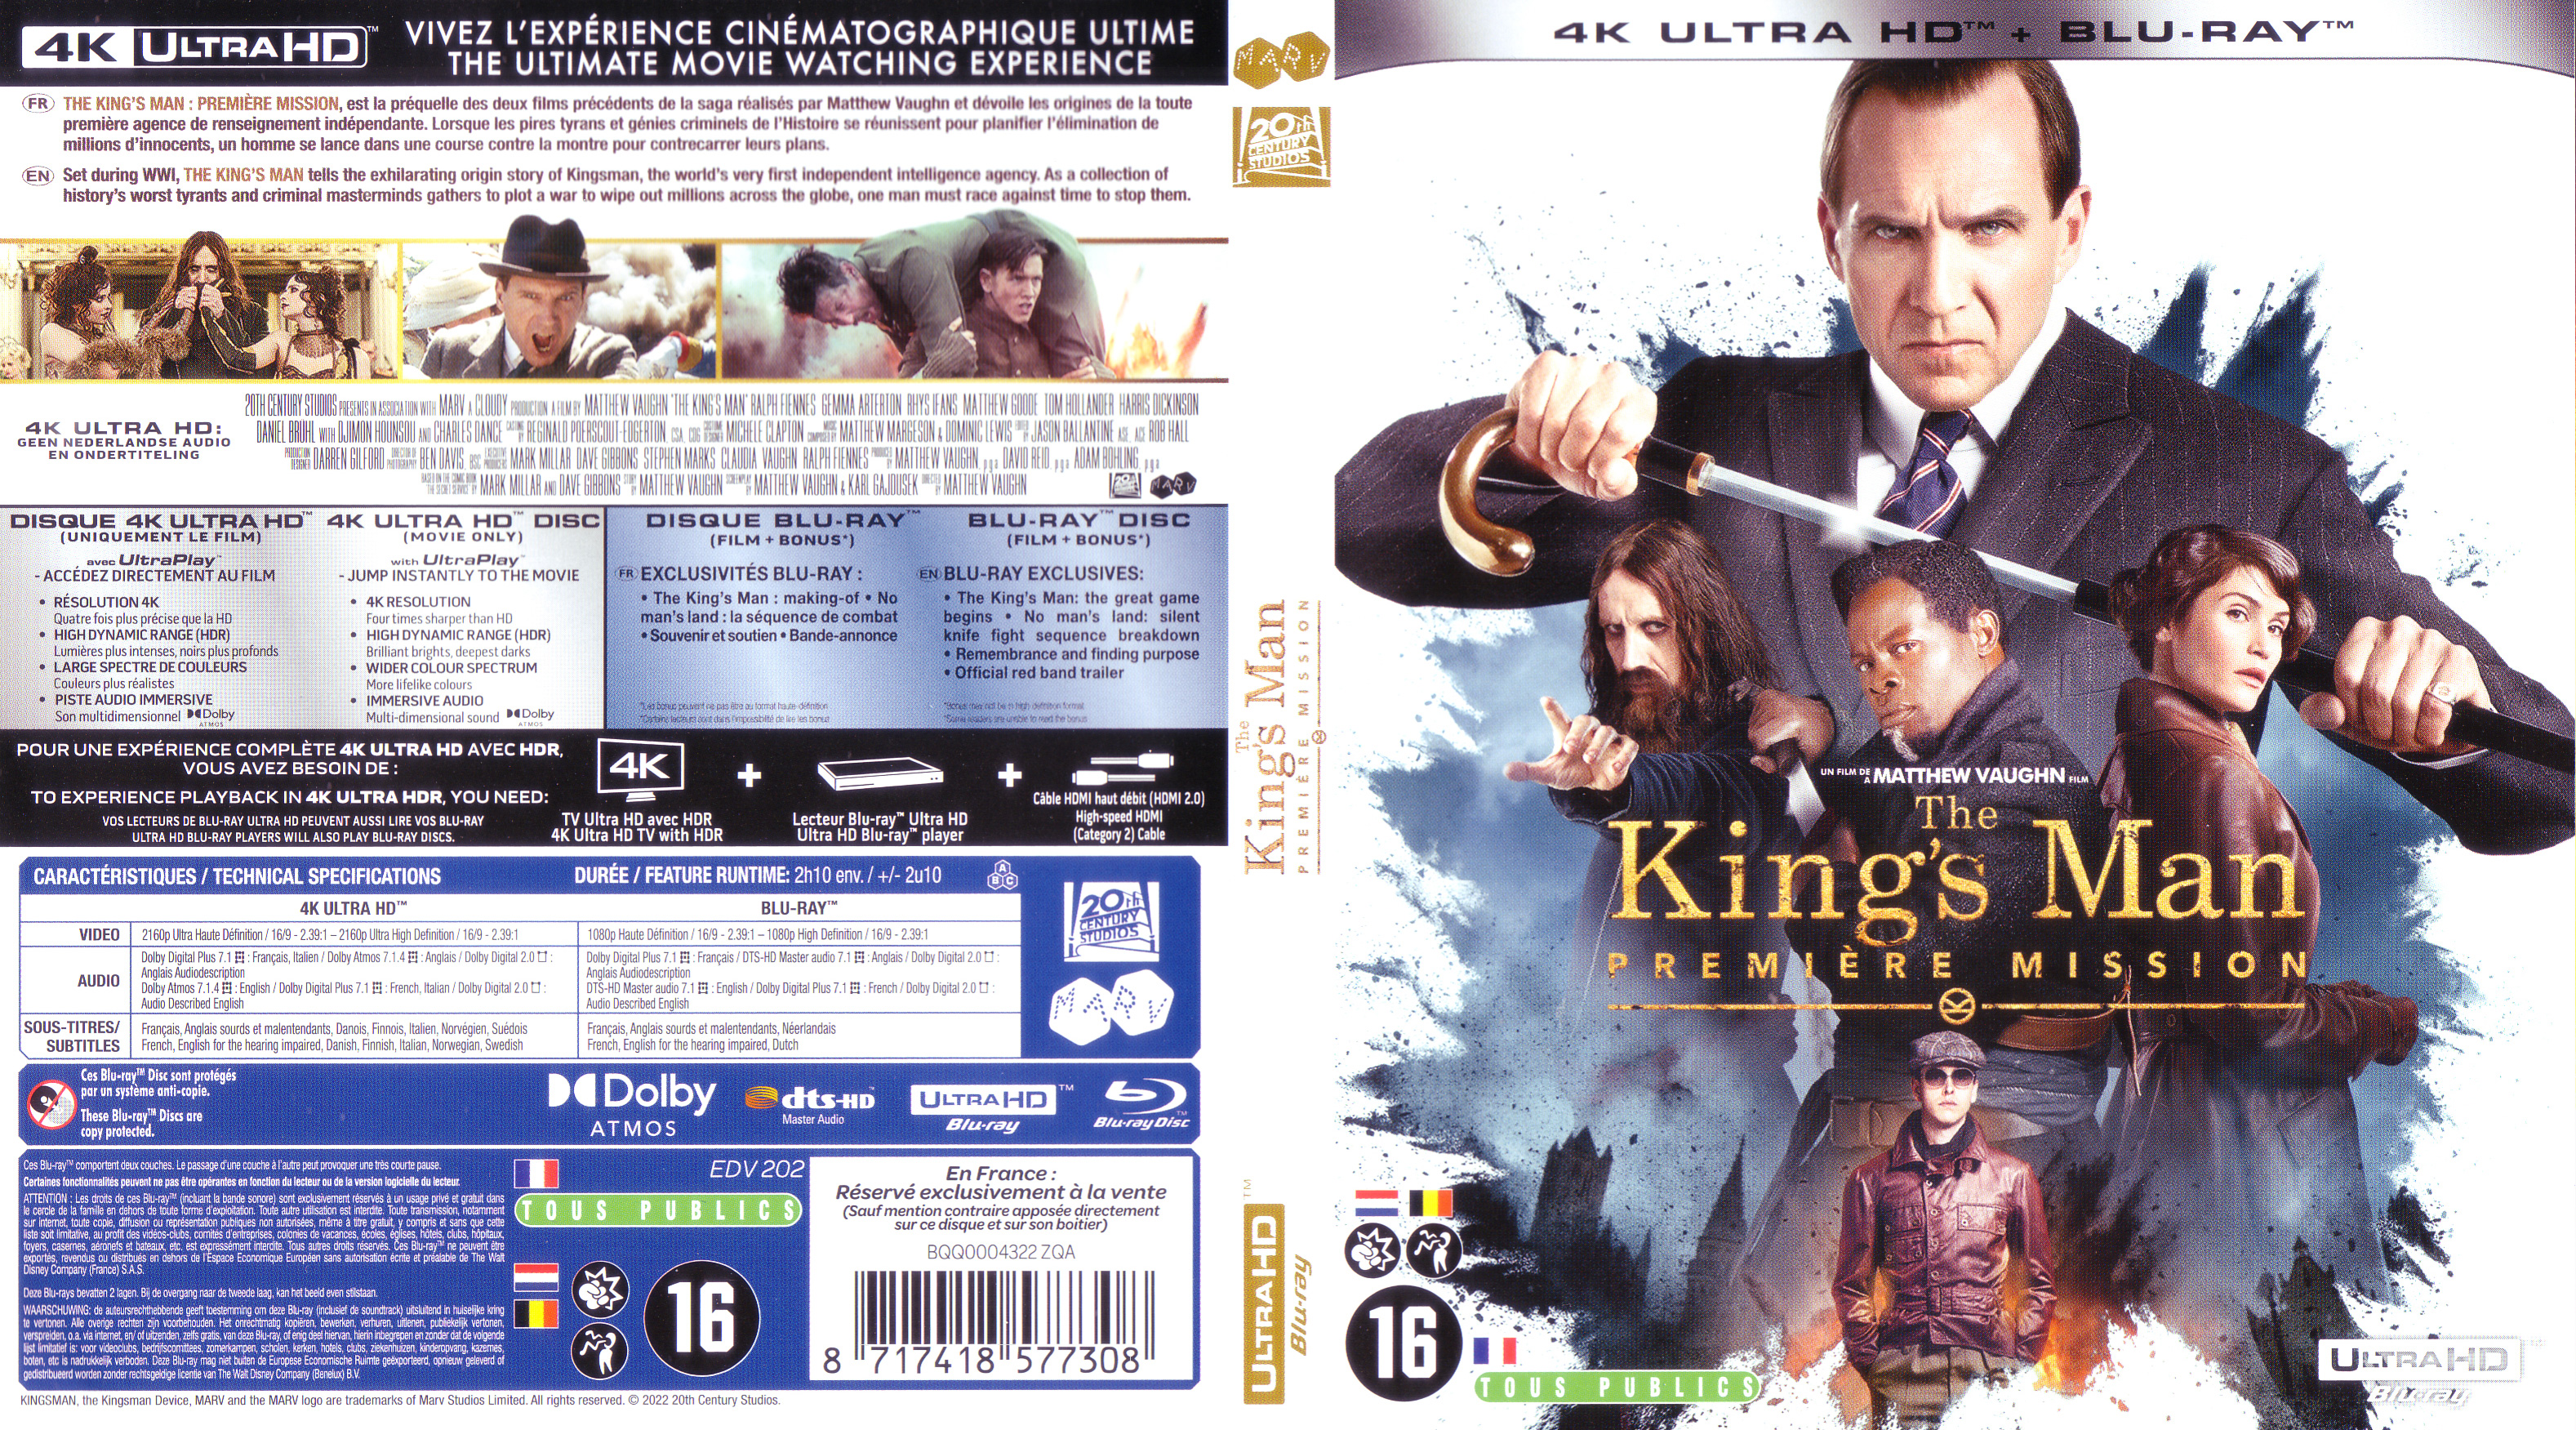 Jaquette DVD The King